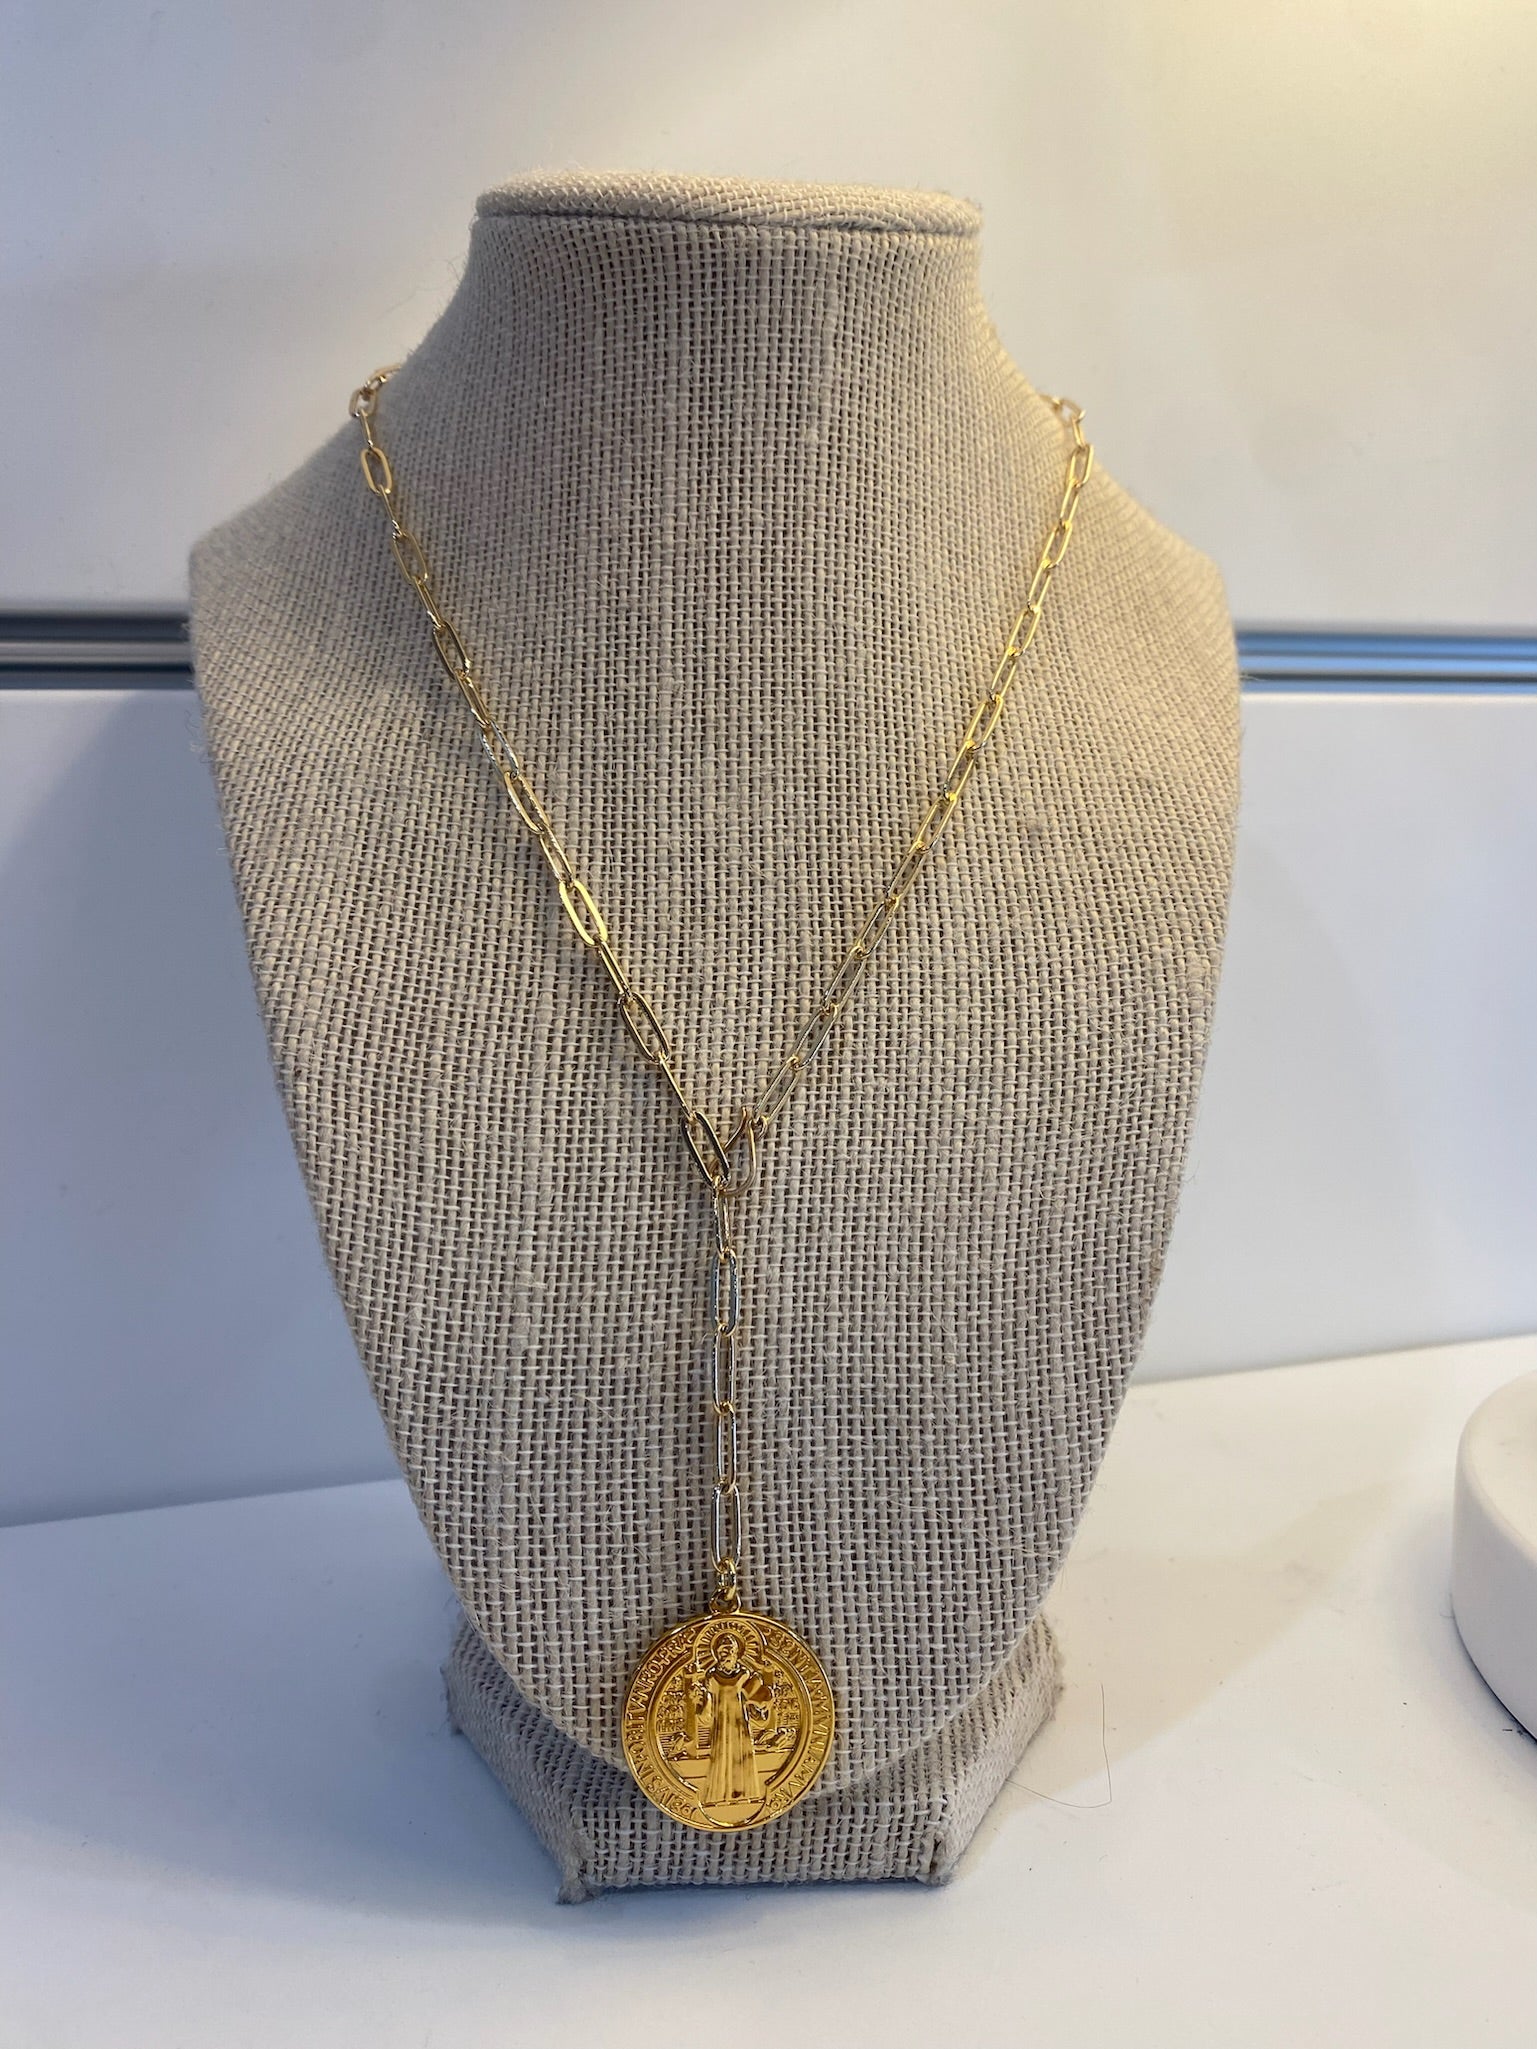 St. Benedict Coin Necklace